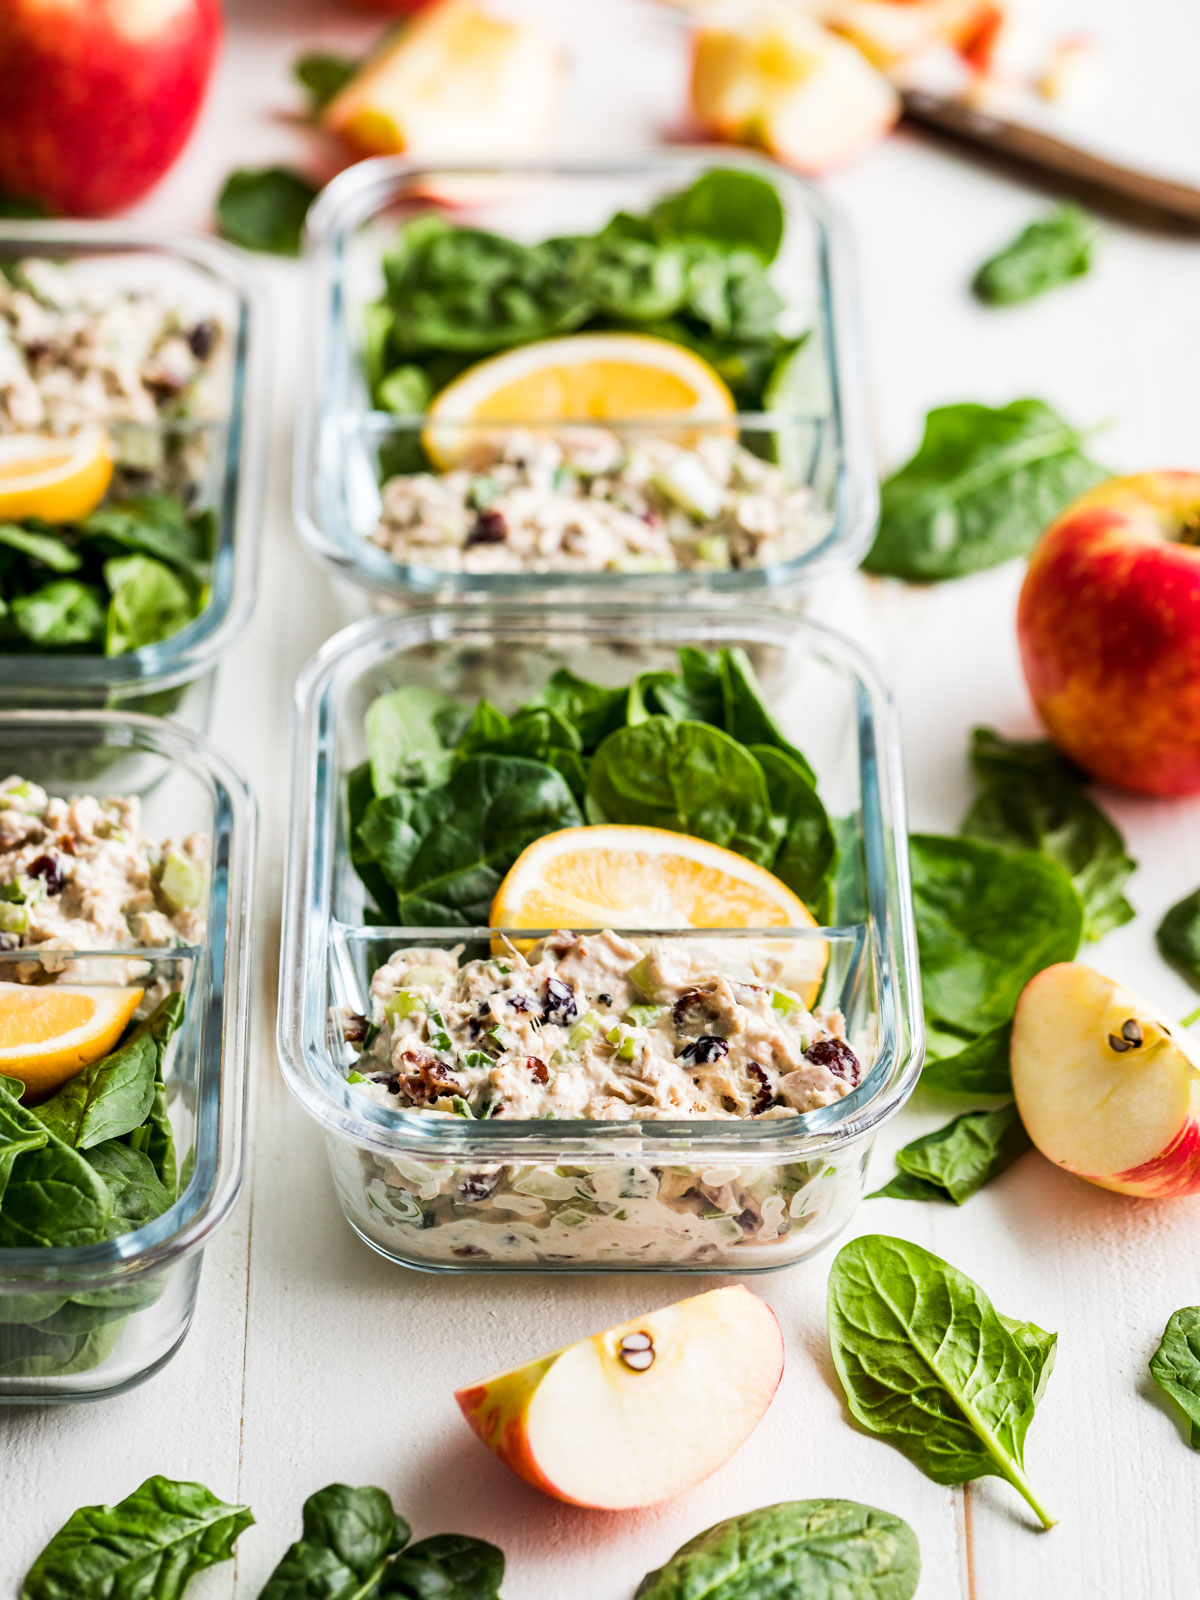 Tuna salad in meal prep containers with apples and spinach.